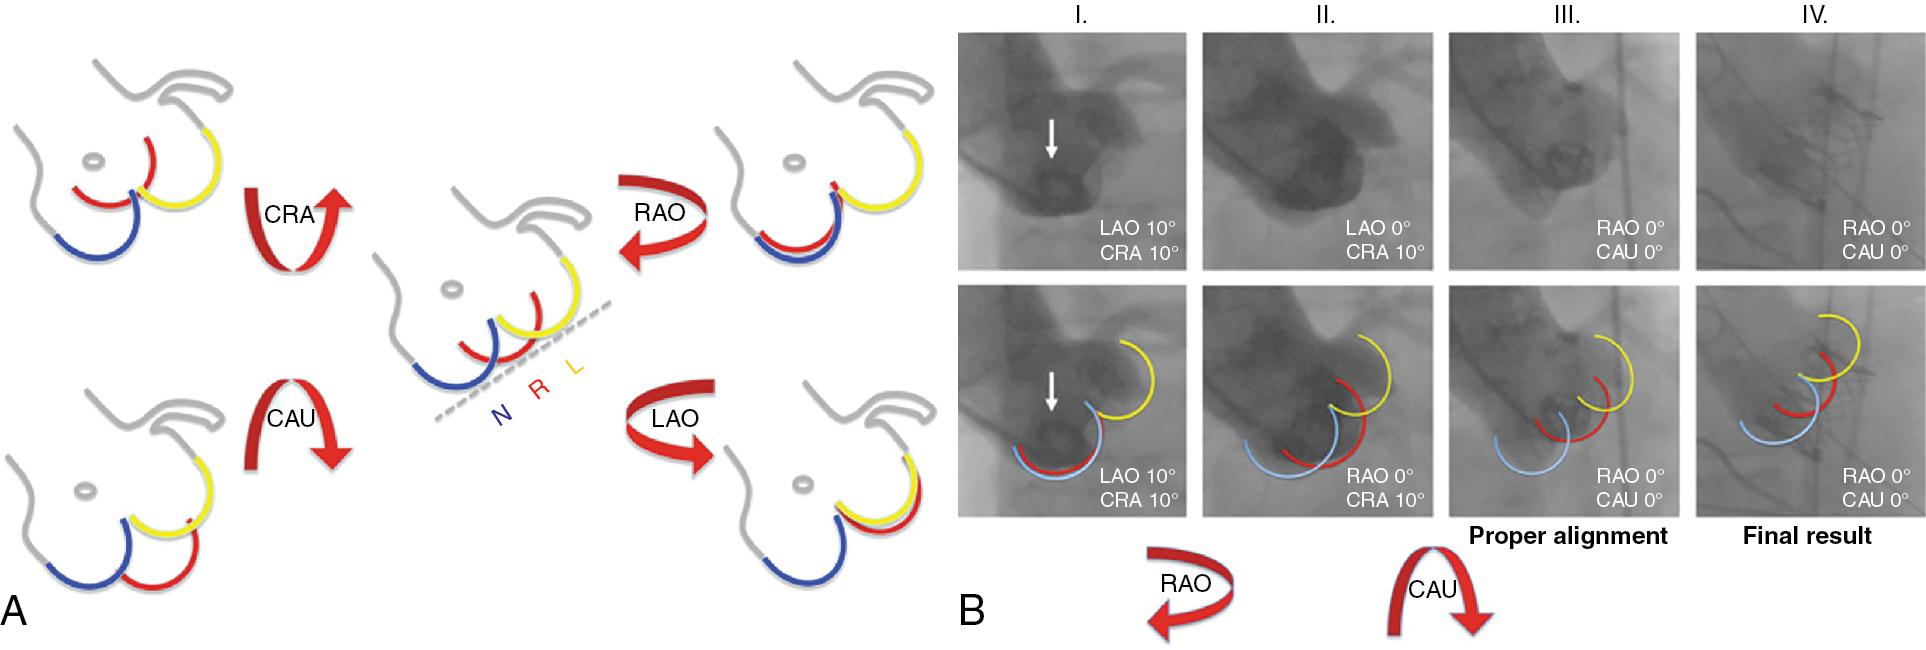 Fig. 10.2, (A) Schematic illustration of the “follow the right cusp” rule pointing to the proper alignment in the case of normal aortic root anatomy. (B) A step-by-step approach: a pigtail catheter is placed in the right cusp as a reference and an LAO 10-degree CRA 10-degree aortogram is performed. If the right cusp is located on the “right” side behind the noncoronary cusp, the C-arm must be led to an RAO projection in order to follow the right cusp. After the projection view has been changed, the right cusp will appear in the middle, but still deeper than the other cusps. Once again, follow the right cusp by turning the C-arm clockwise to the CAU direction. After alignment is obtained, providing that the most caudal attachments of all three of the aortic leaflets result in one axial image, a final angiogram can be performed to confirm the working projection step-by-step approach. CAU, Caudal; CRA, cranial; L, left coronary cusp; LAO, left anterior oblique; N, noncoronary cusp; R, right coronary cusp; RAO, right anterior oblique.